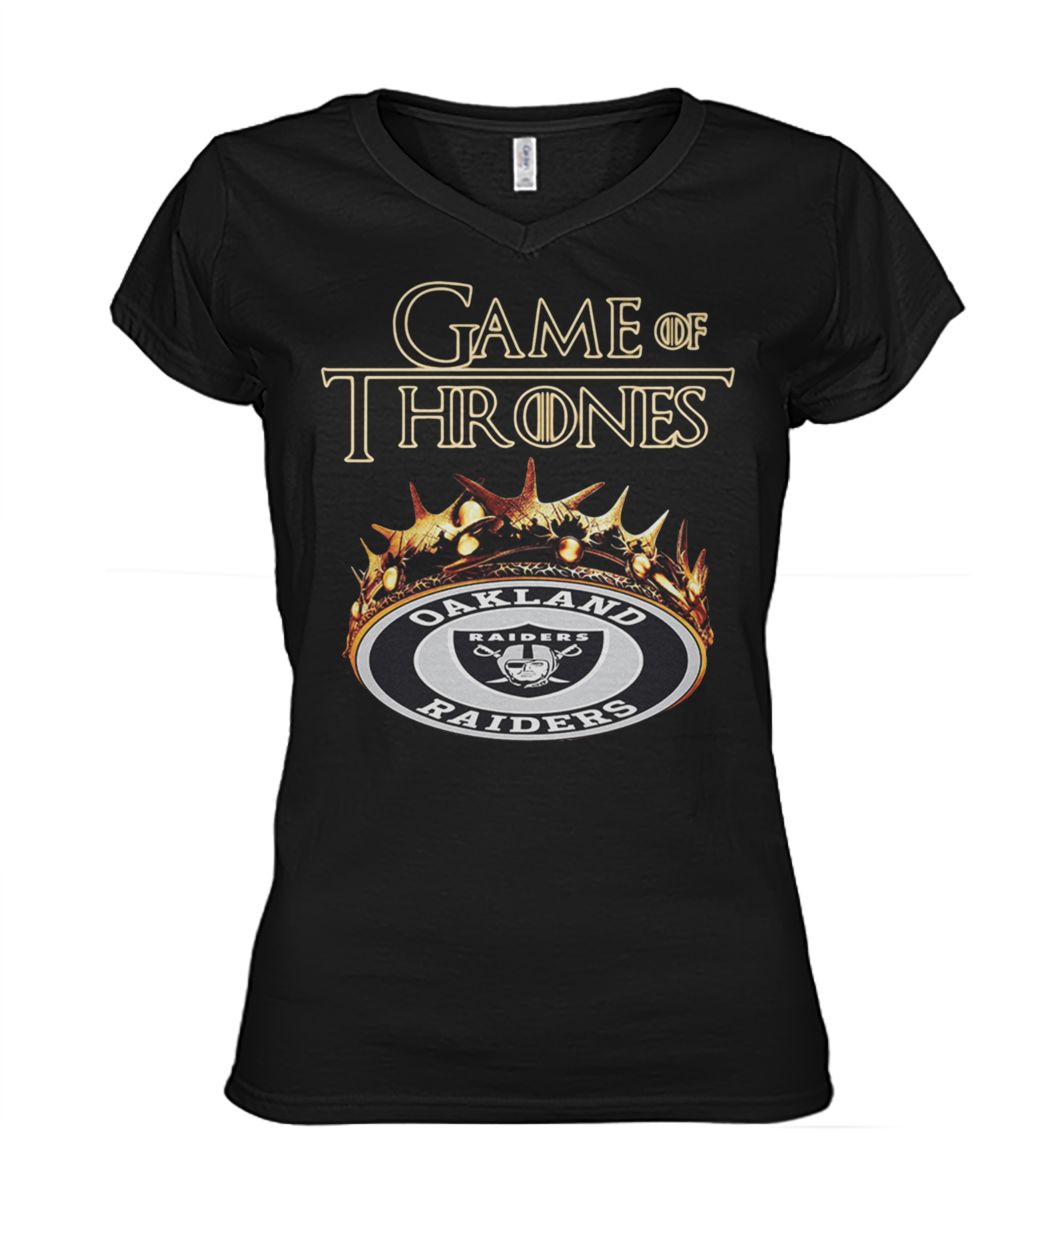 Game of thrones crown oakland raiders women's v-neck